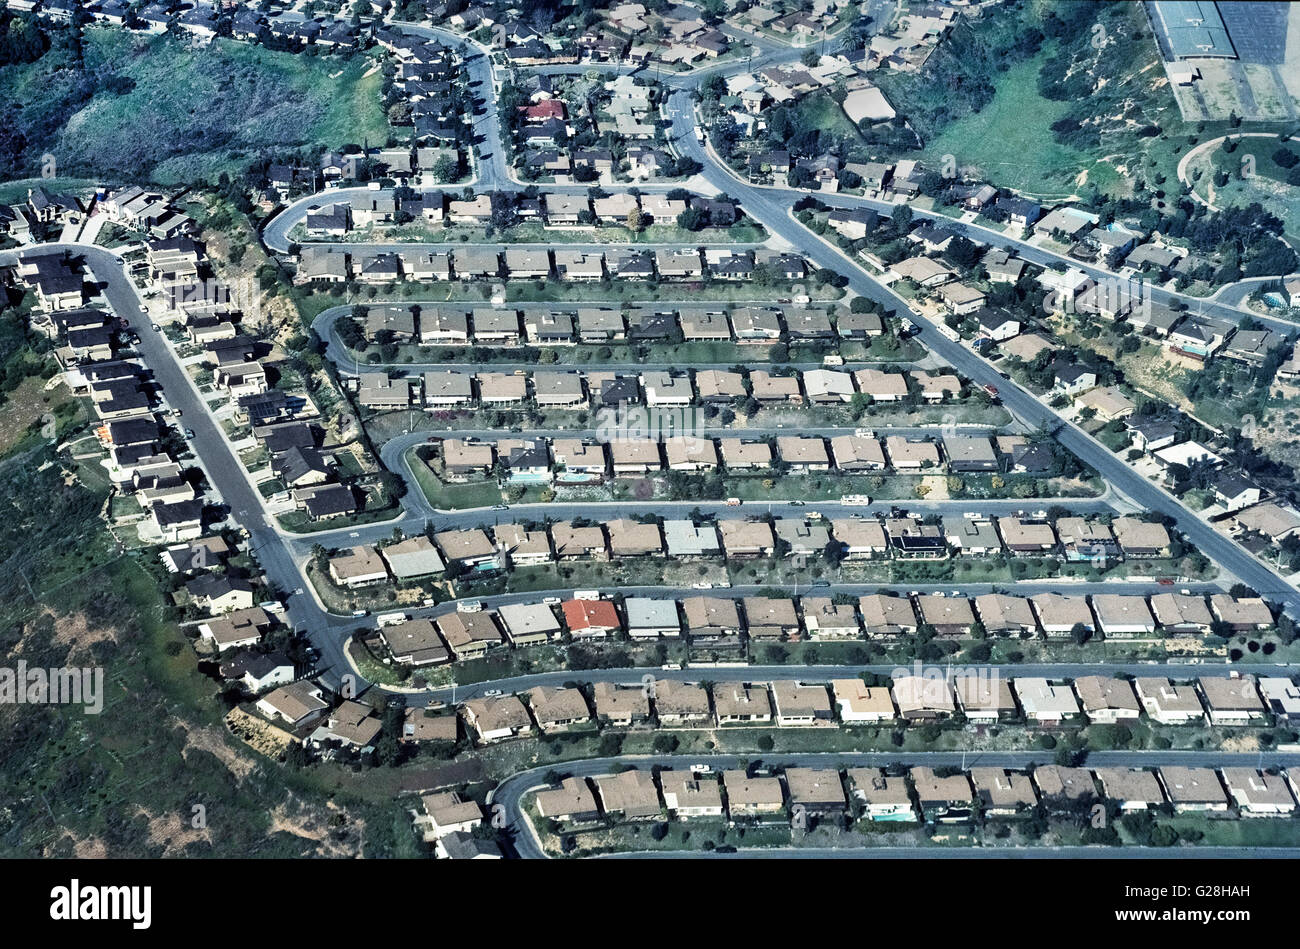 An aerial view shows side-by-side homes that are crammed into this housing development among foothills in San Diego County in Southern California, USA. Such jam-packed suburban neighborhoods are common there because of the popularity of that southernmost county in the state and the area's exceptionally pleasant weather. Stock Photo